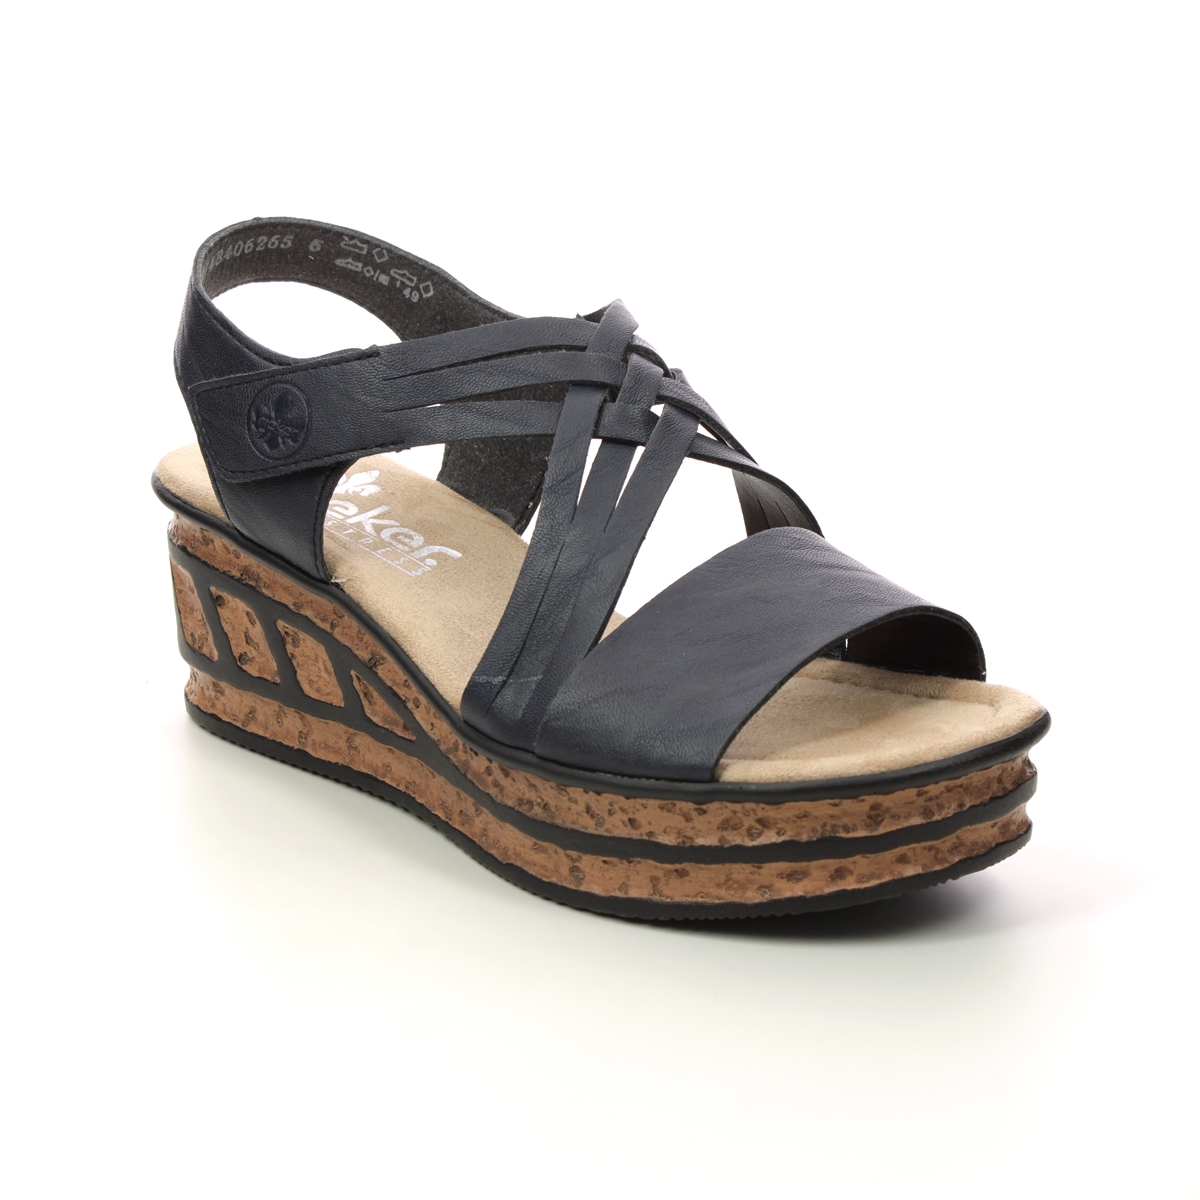 Rieker 68179-14 Navy Womens Wedge Sandals in a Plain Man-made in Size 40